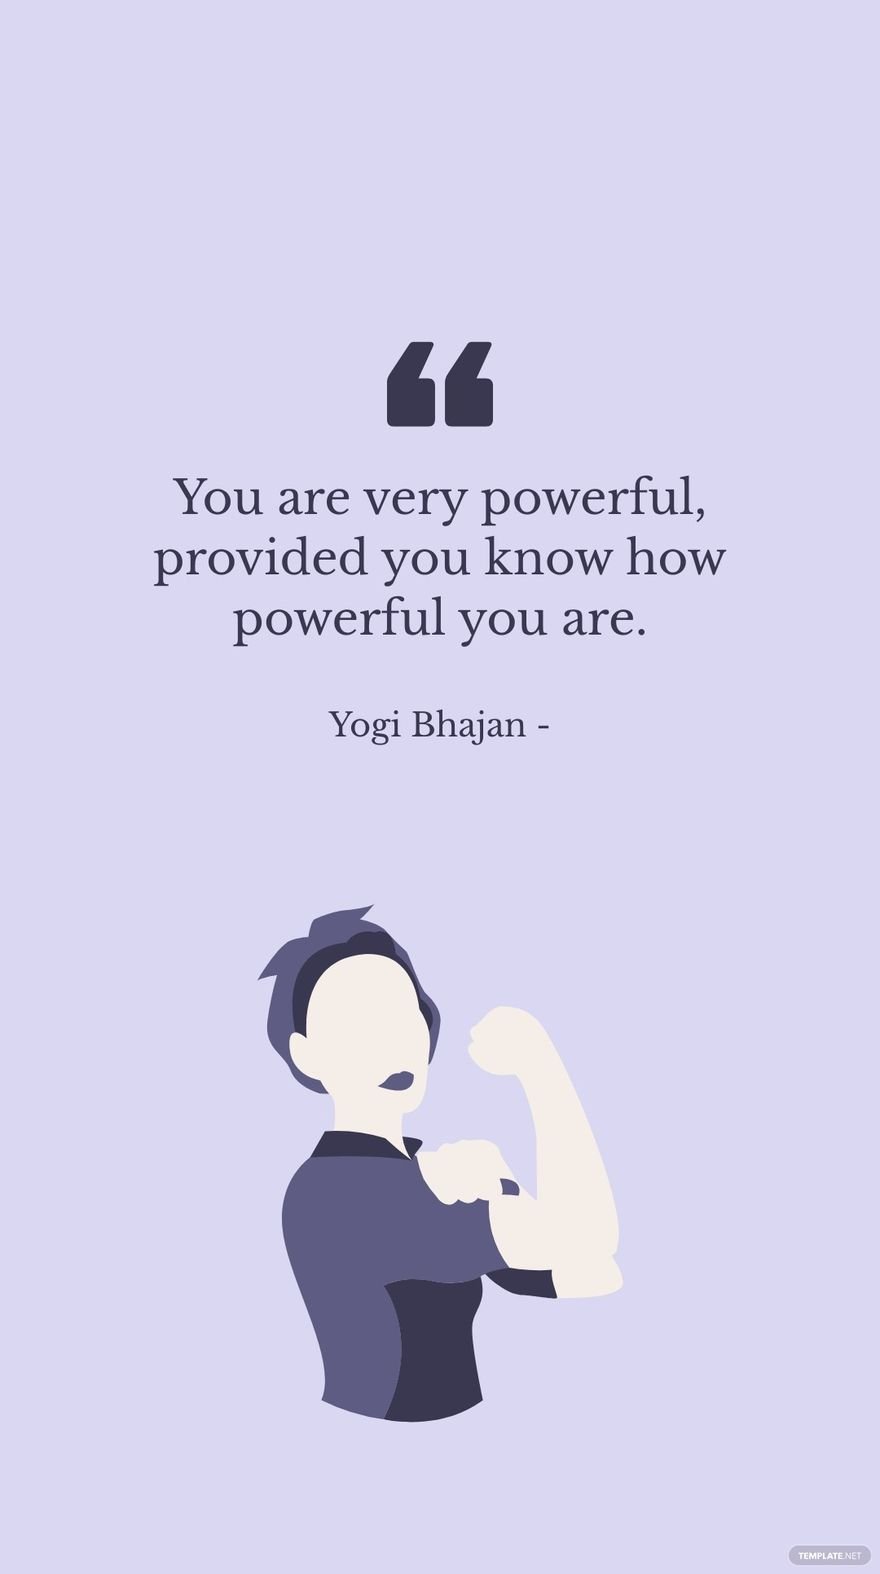 Yogi Bhajan - You are very powerful, provided you know how powerful you are.